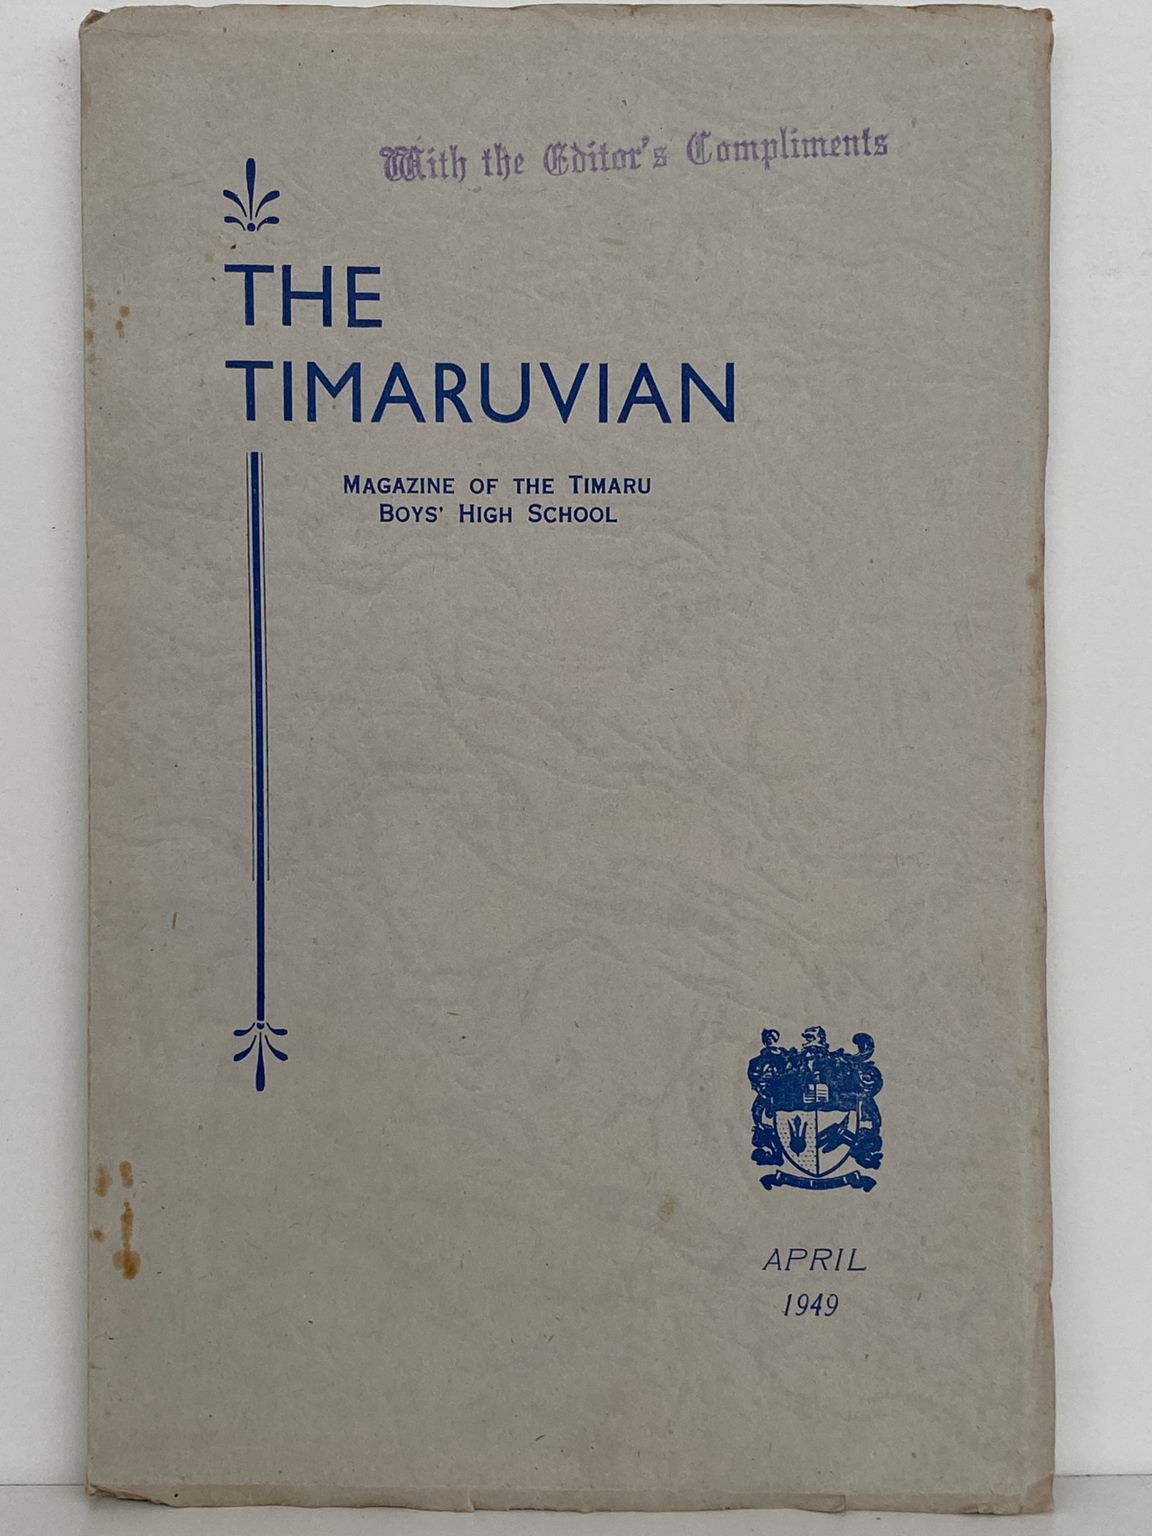 THE TIMARUVIAN: Magazine of the Timaru Boys' High School and its Old Boys' Association 1949